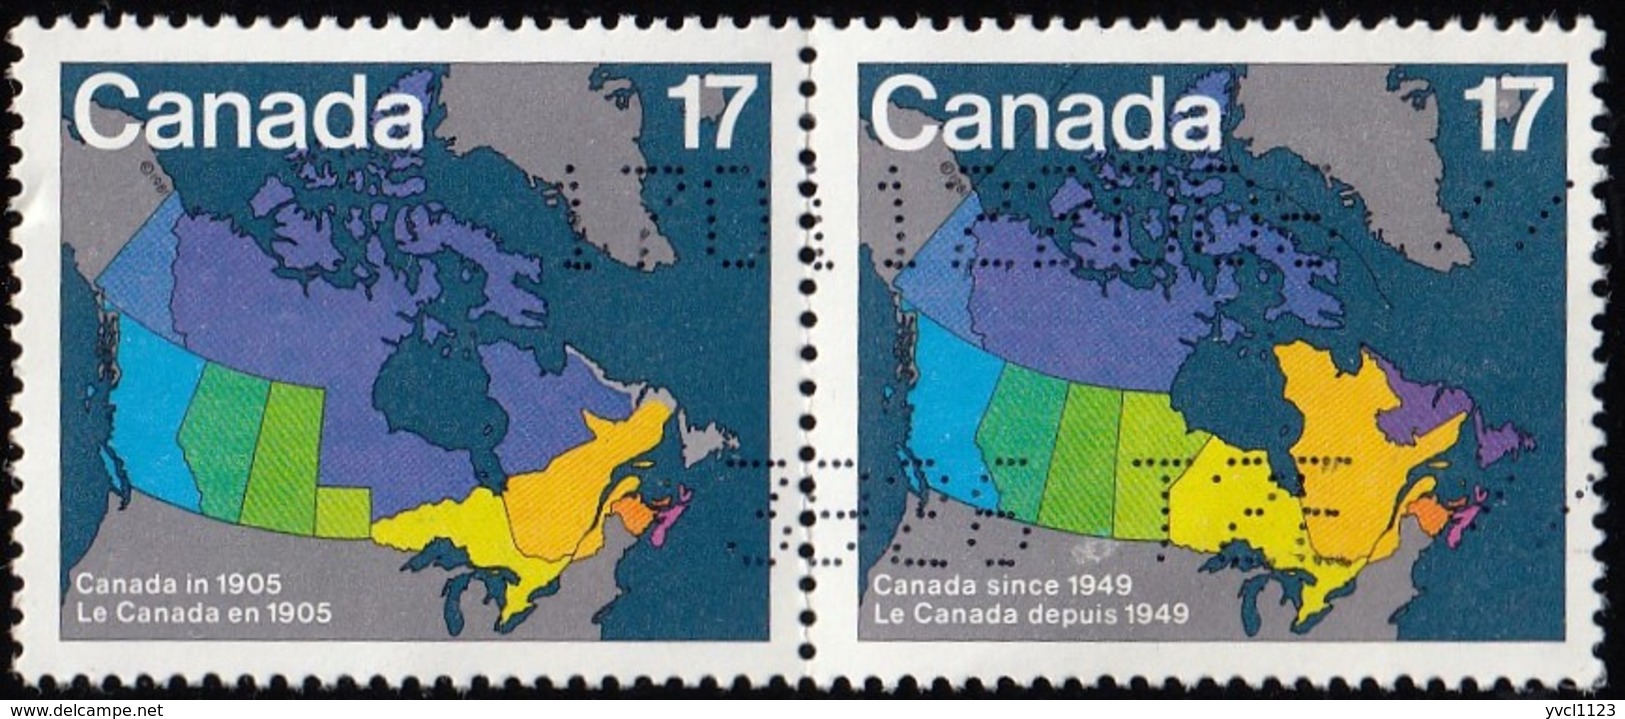 CANADA - Scott #892-893 Map Showing Evolution Of Canada, 1905 And 1949 / Used Stamp - Used Stamps